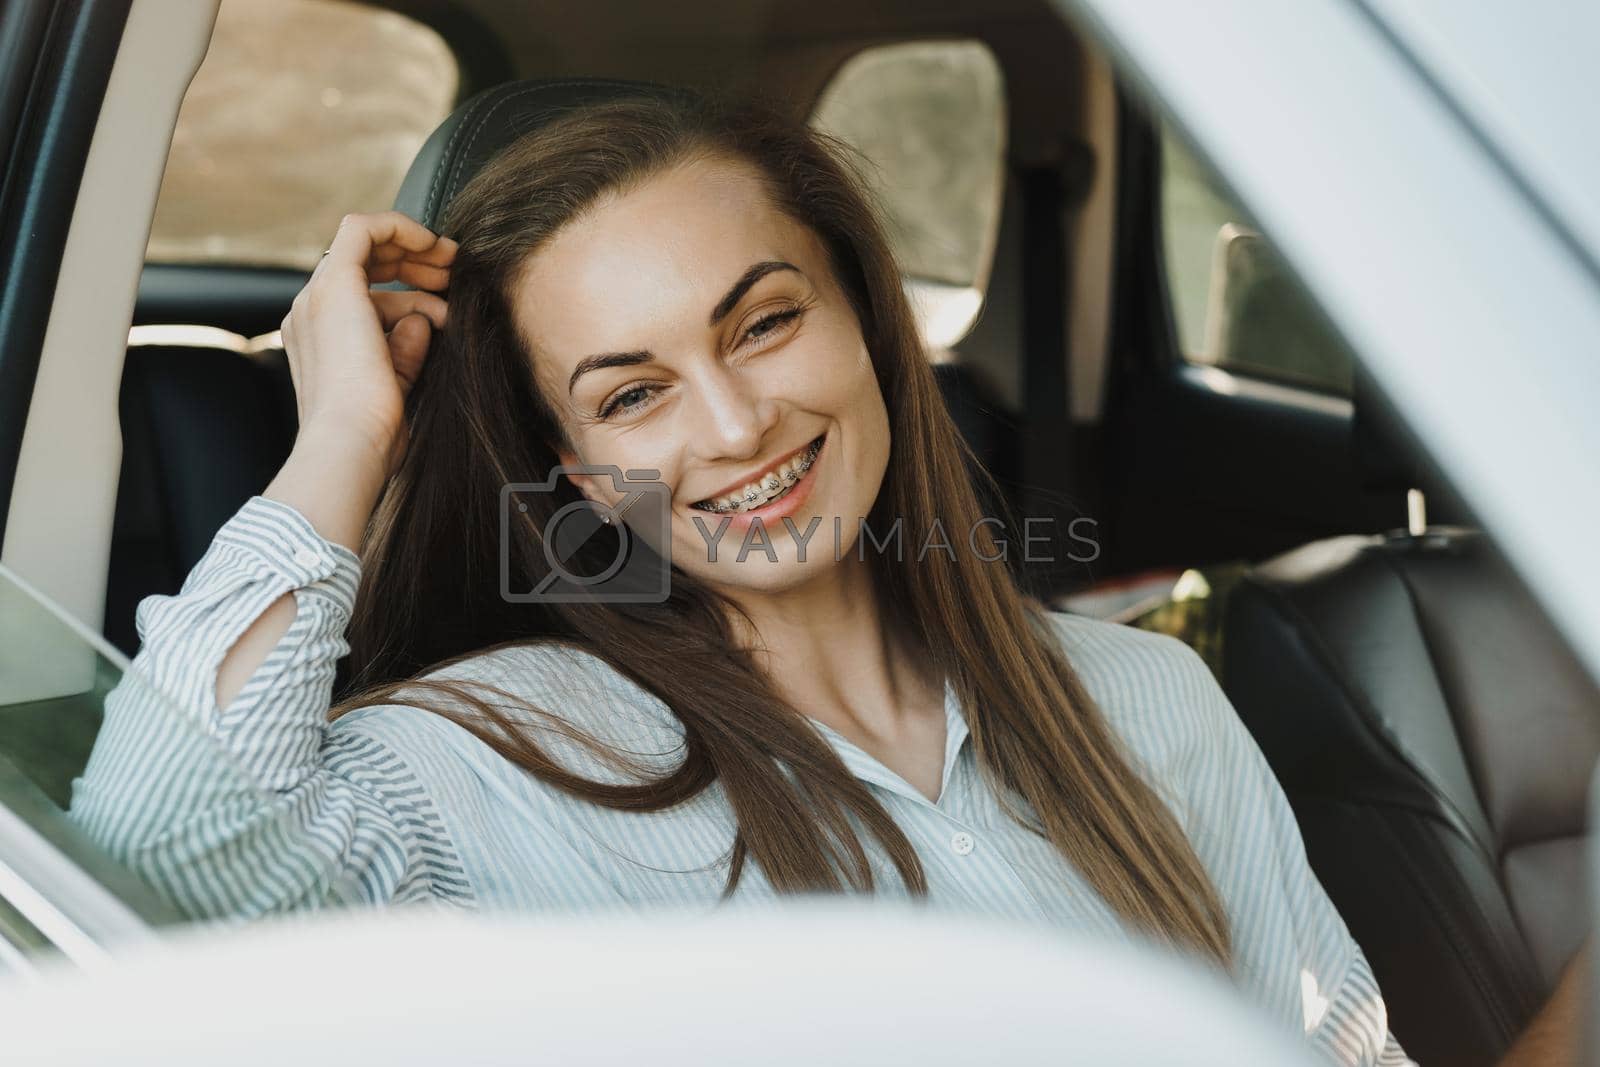 Royalty free image of Middle aged woman with dental braces smile while sitting inside car by Romvy